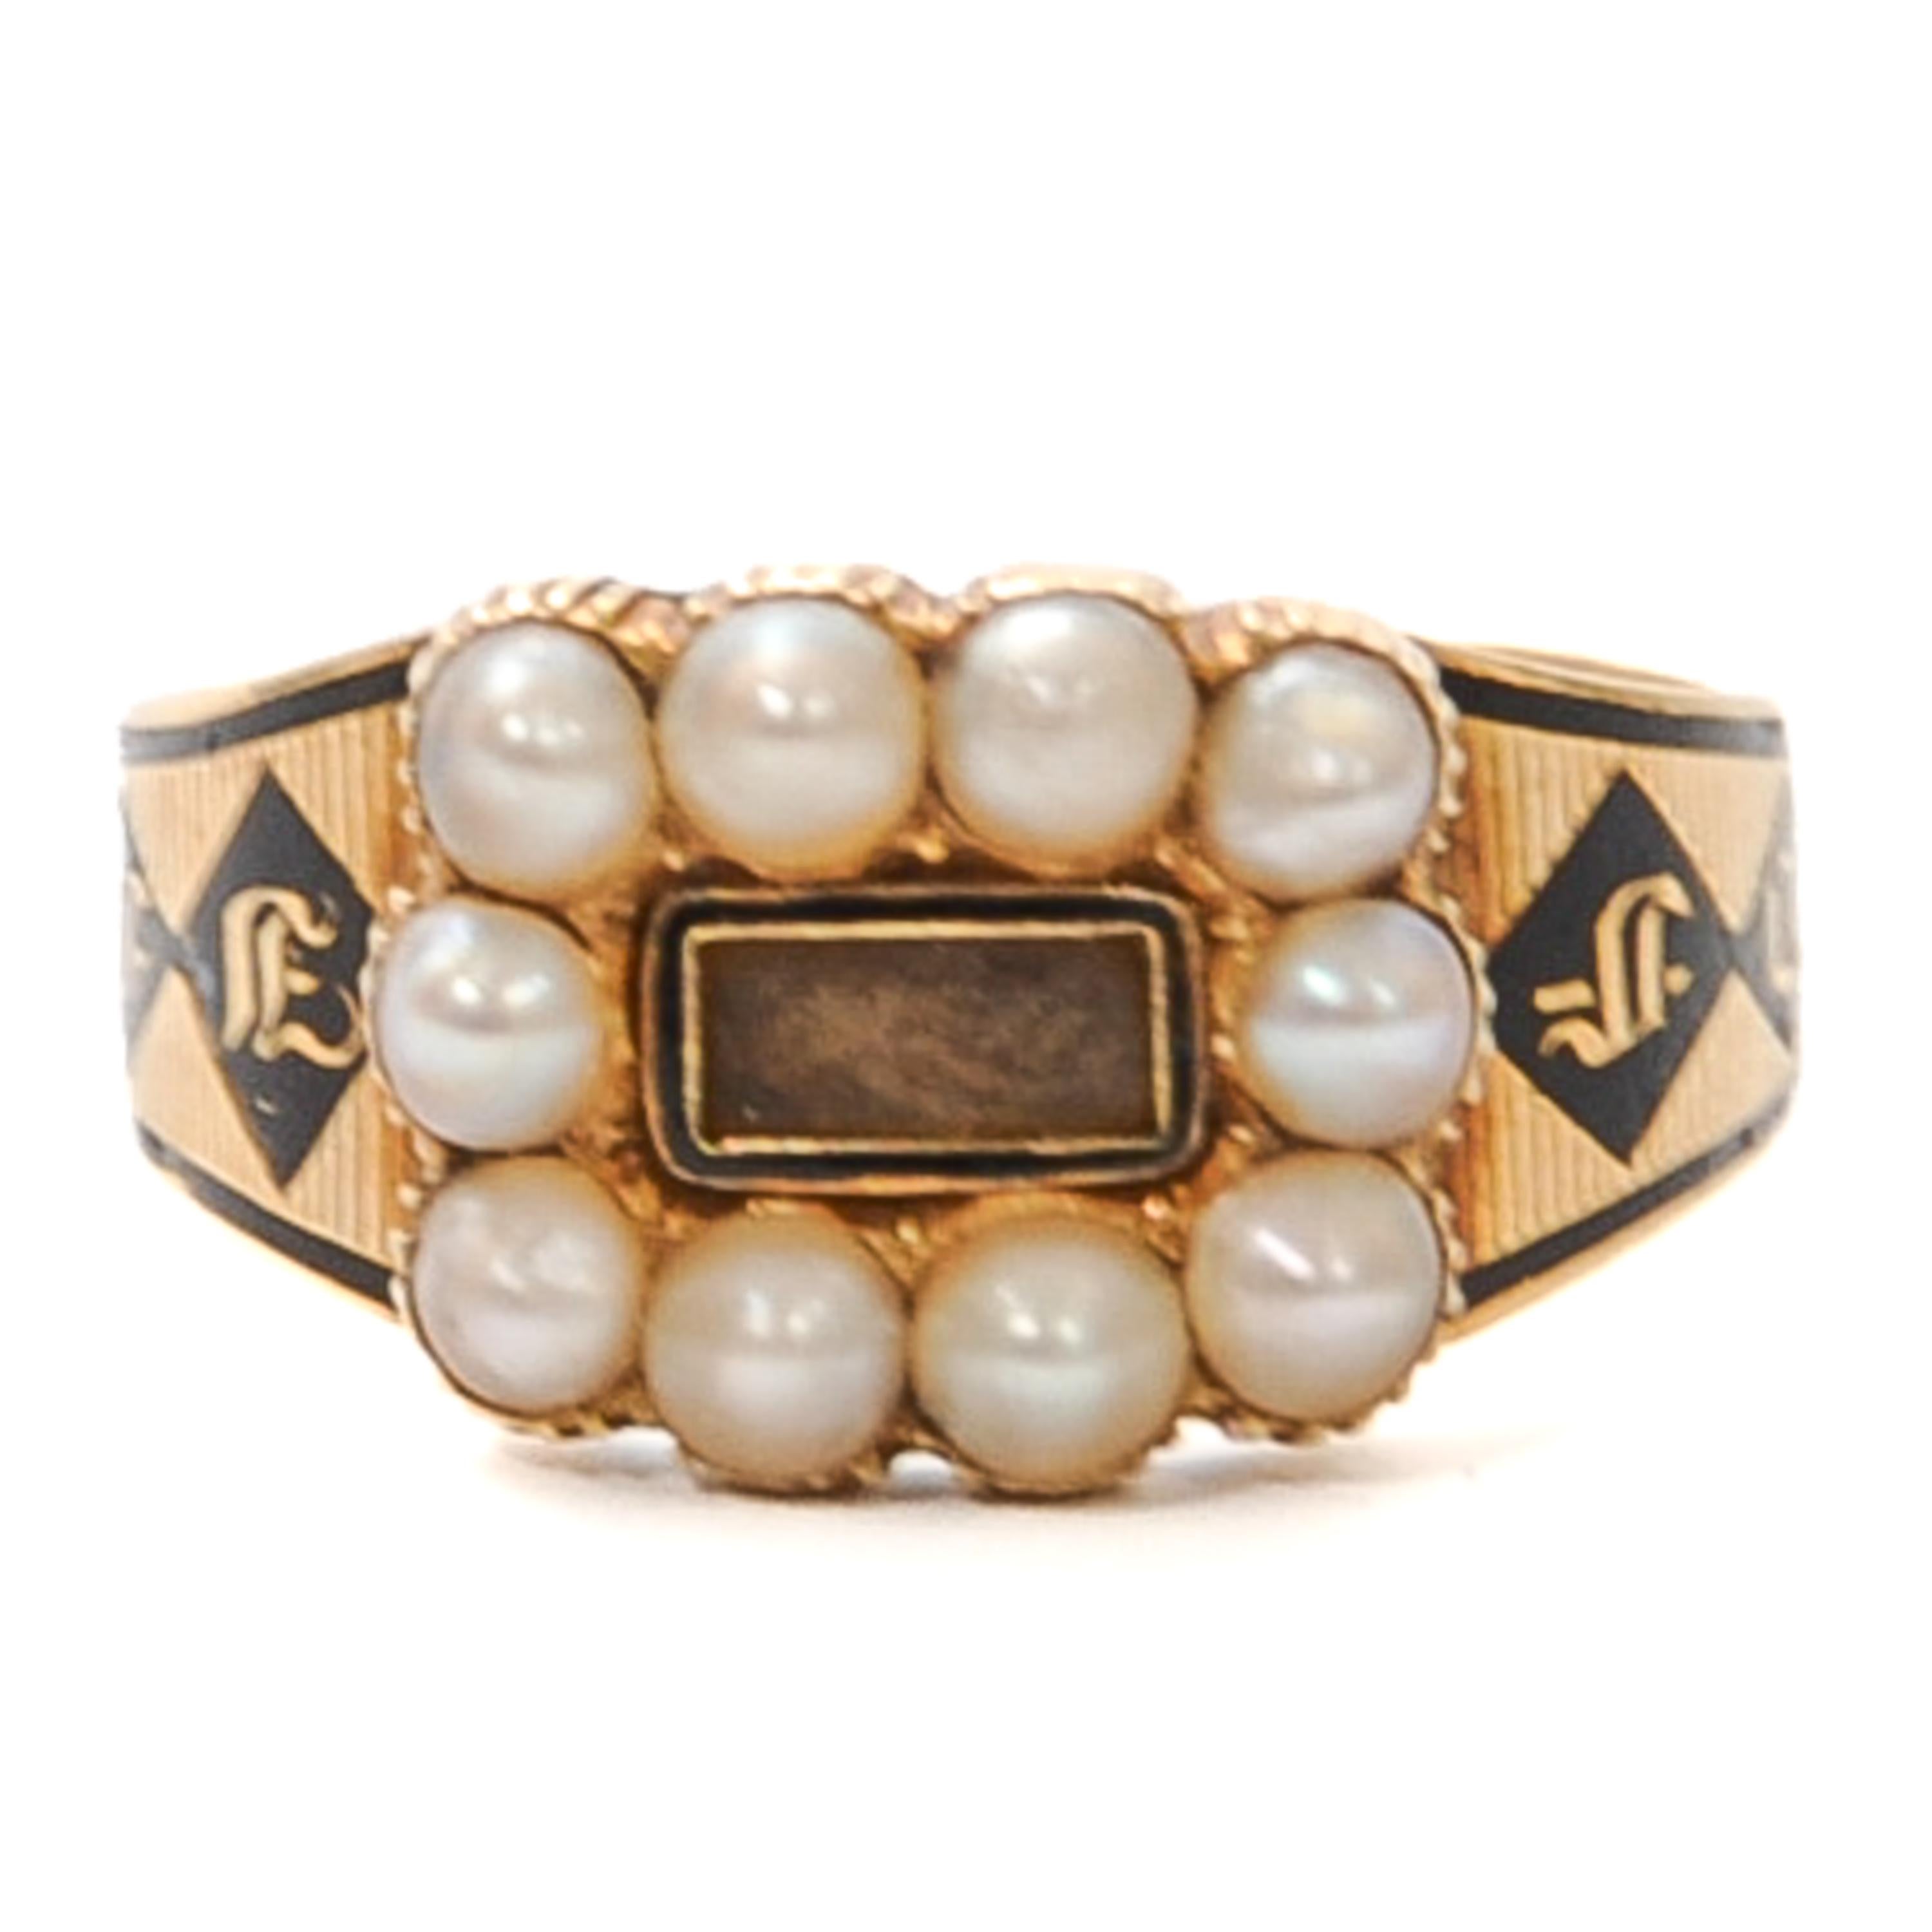 Antique English 18K Gold Memorial Ring from 1831 with Pearls and Black Enamel For Sale 5